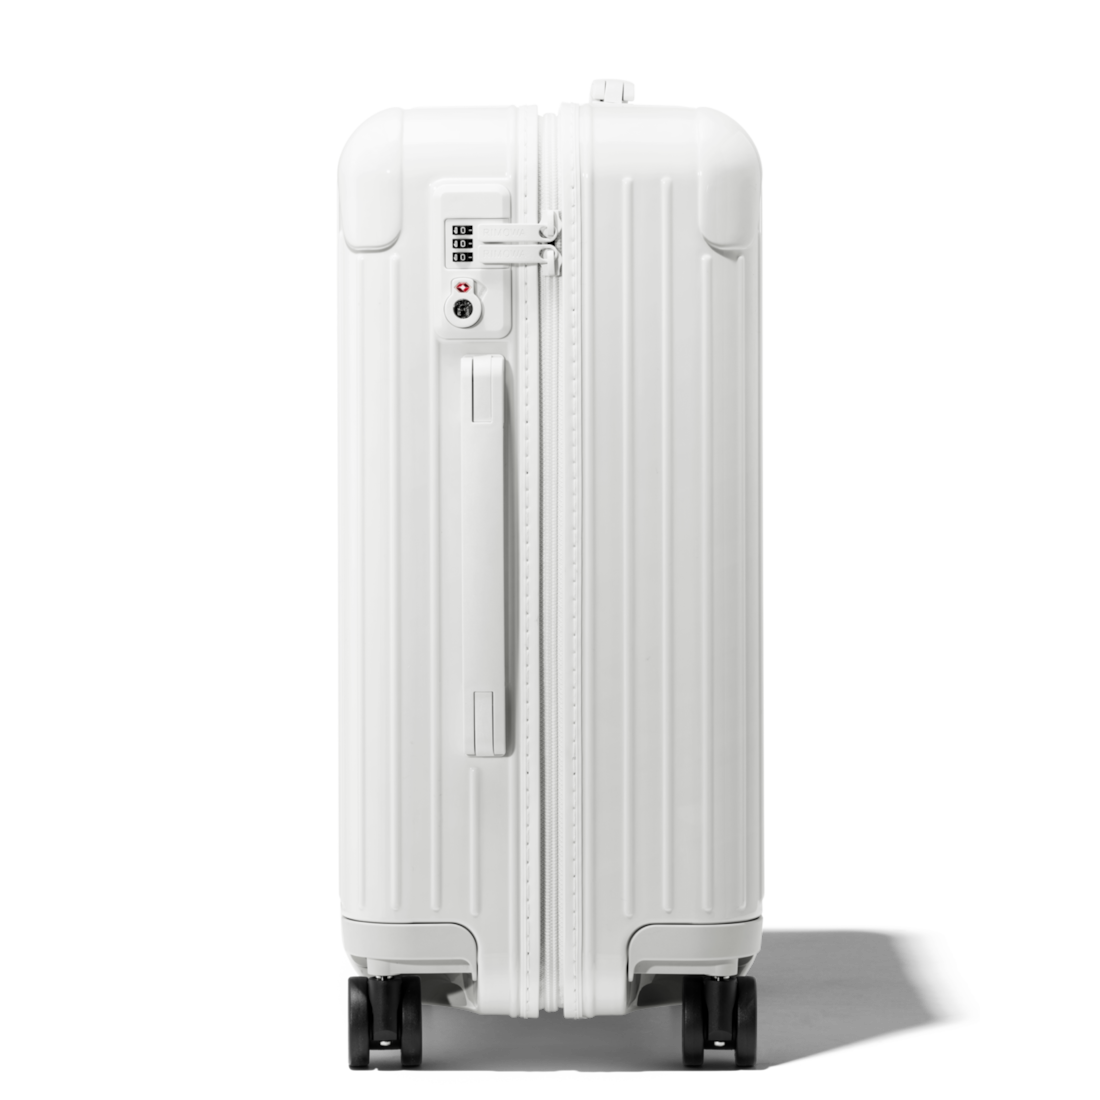 Essential Cabin Lightweight Carry-On Suitcase, White Gloss